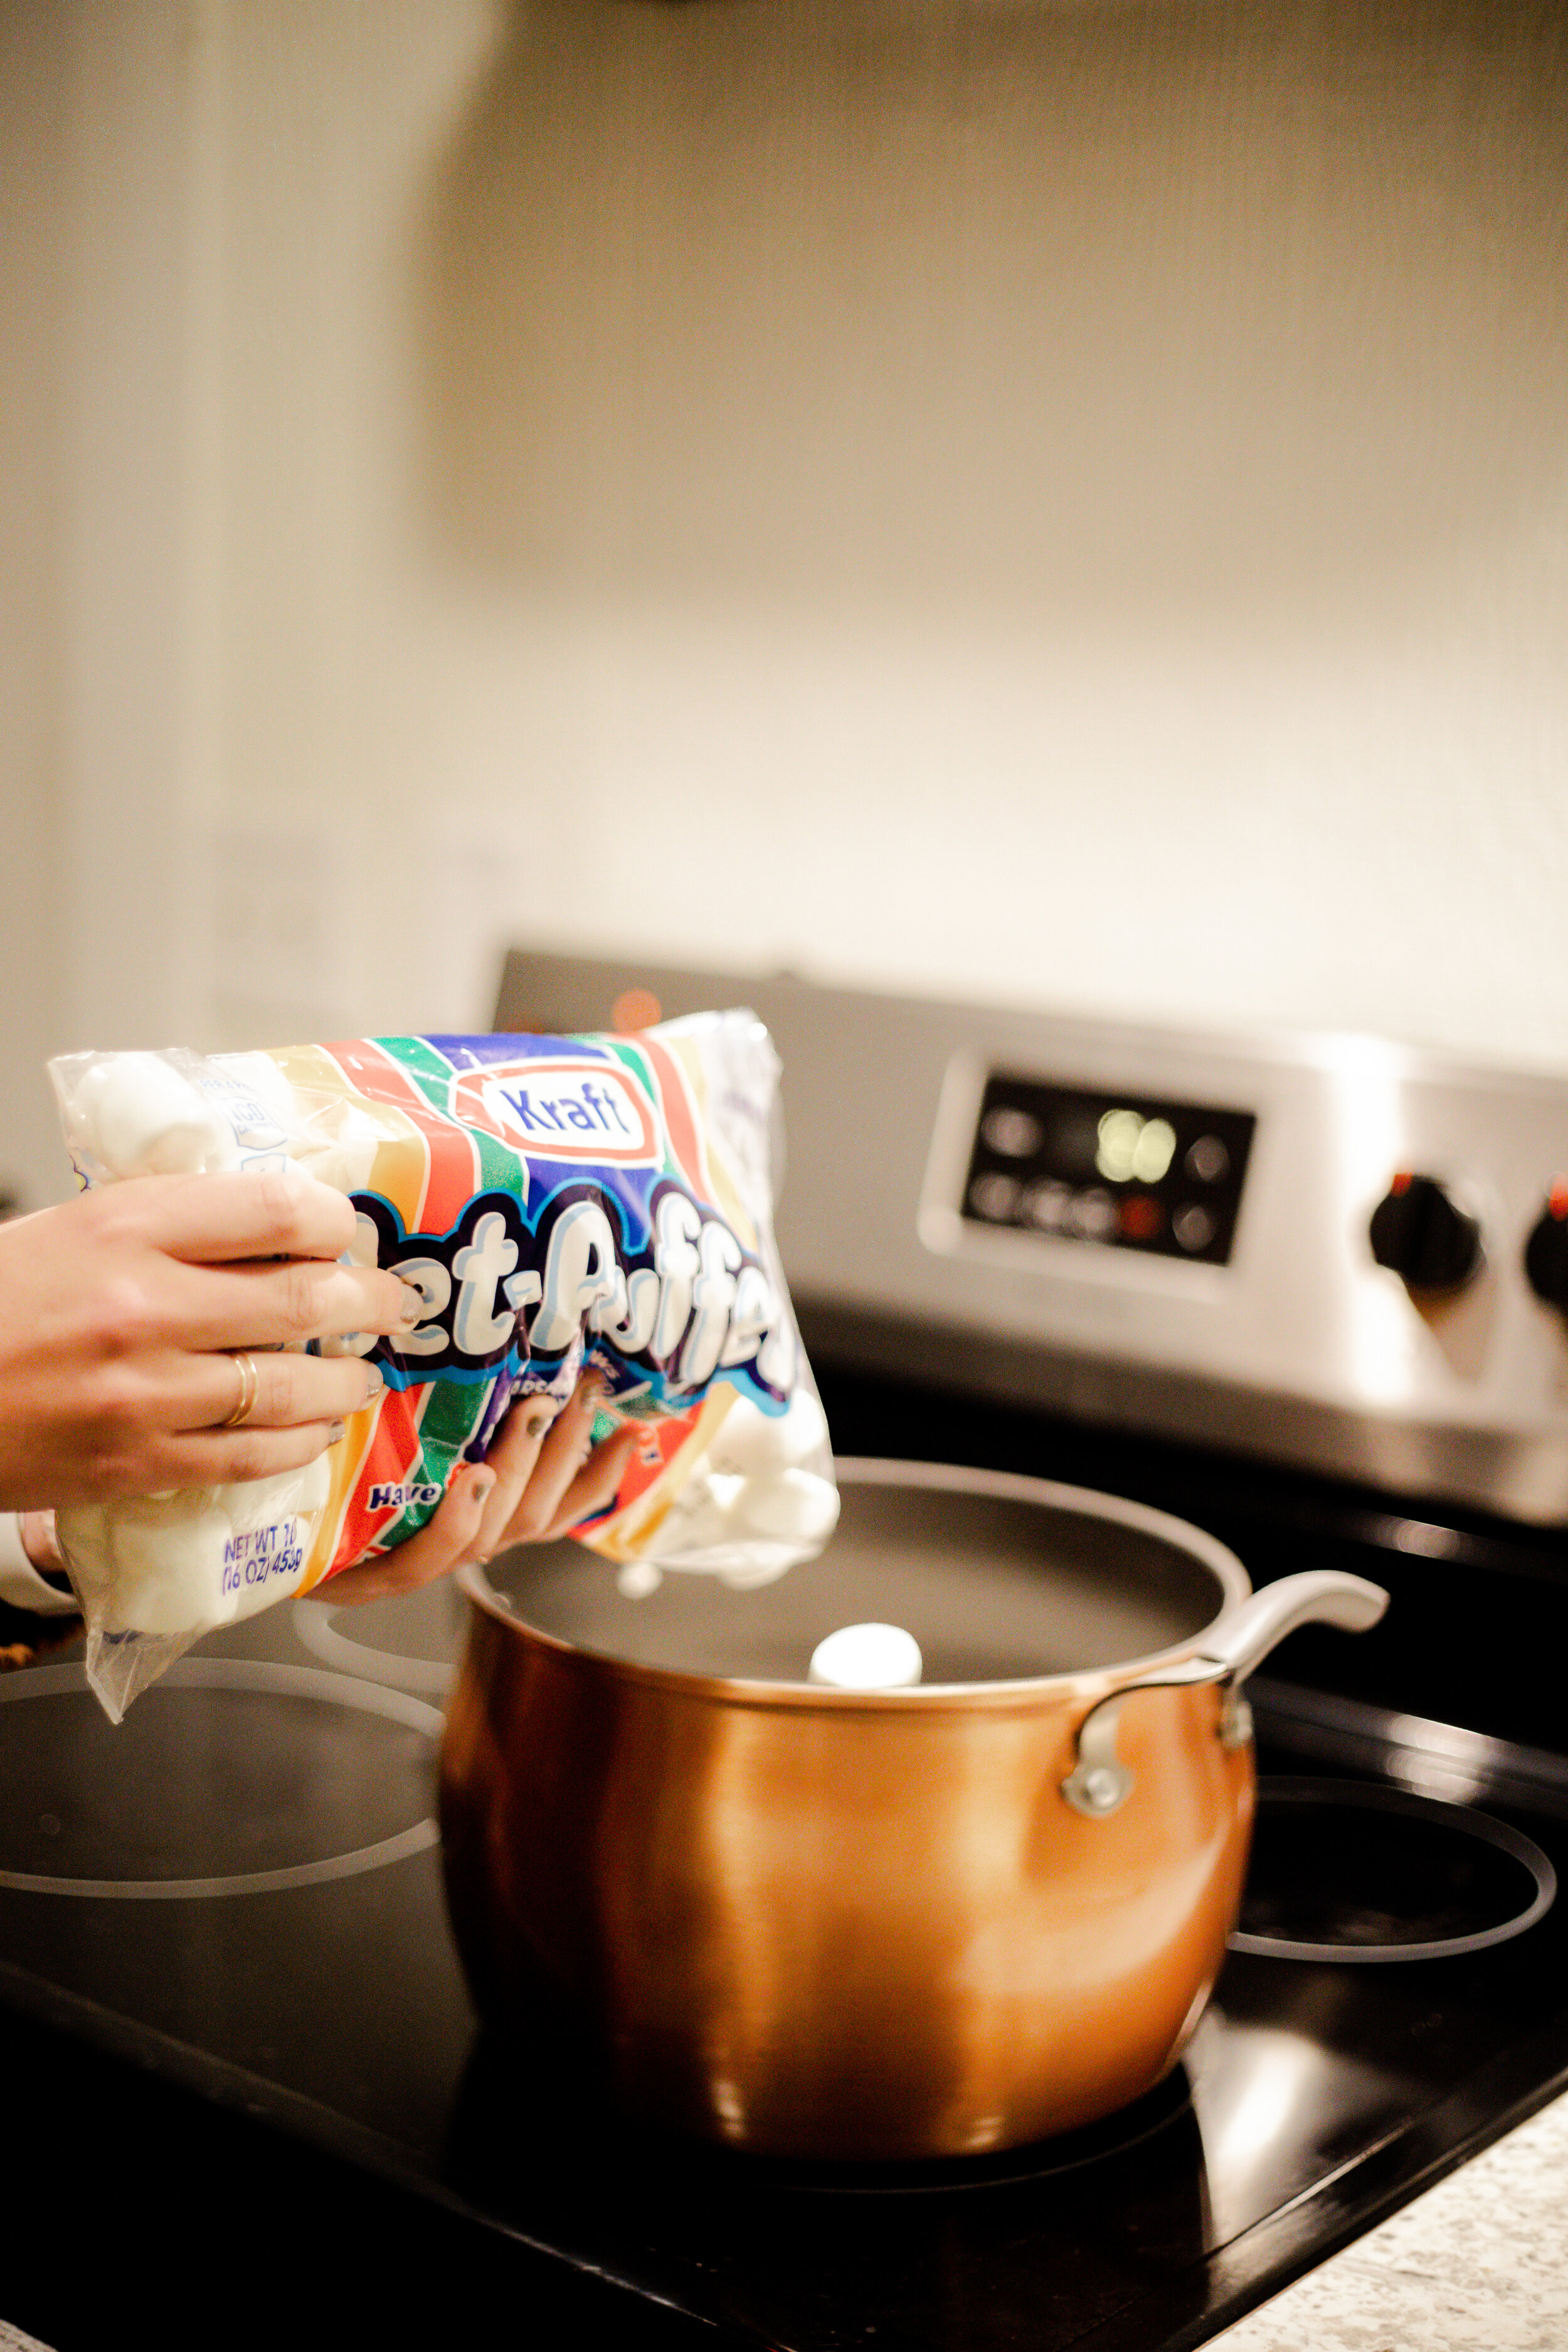 First, pour the whole bag of marshmallows into a large pot on the stove. Turn the stove to medium heat so that the marshmallows begin to melt.